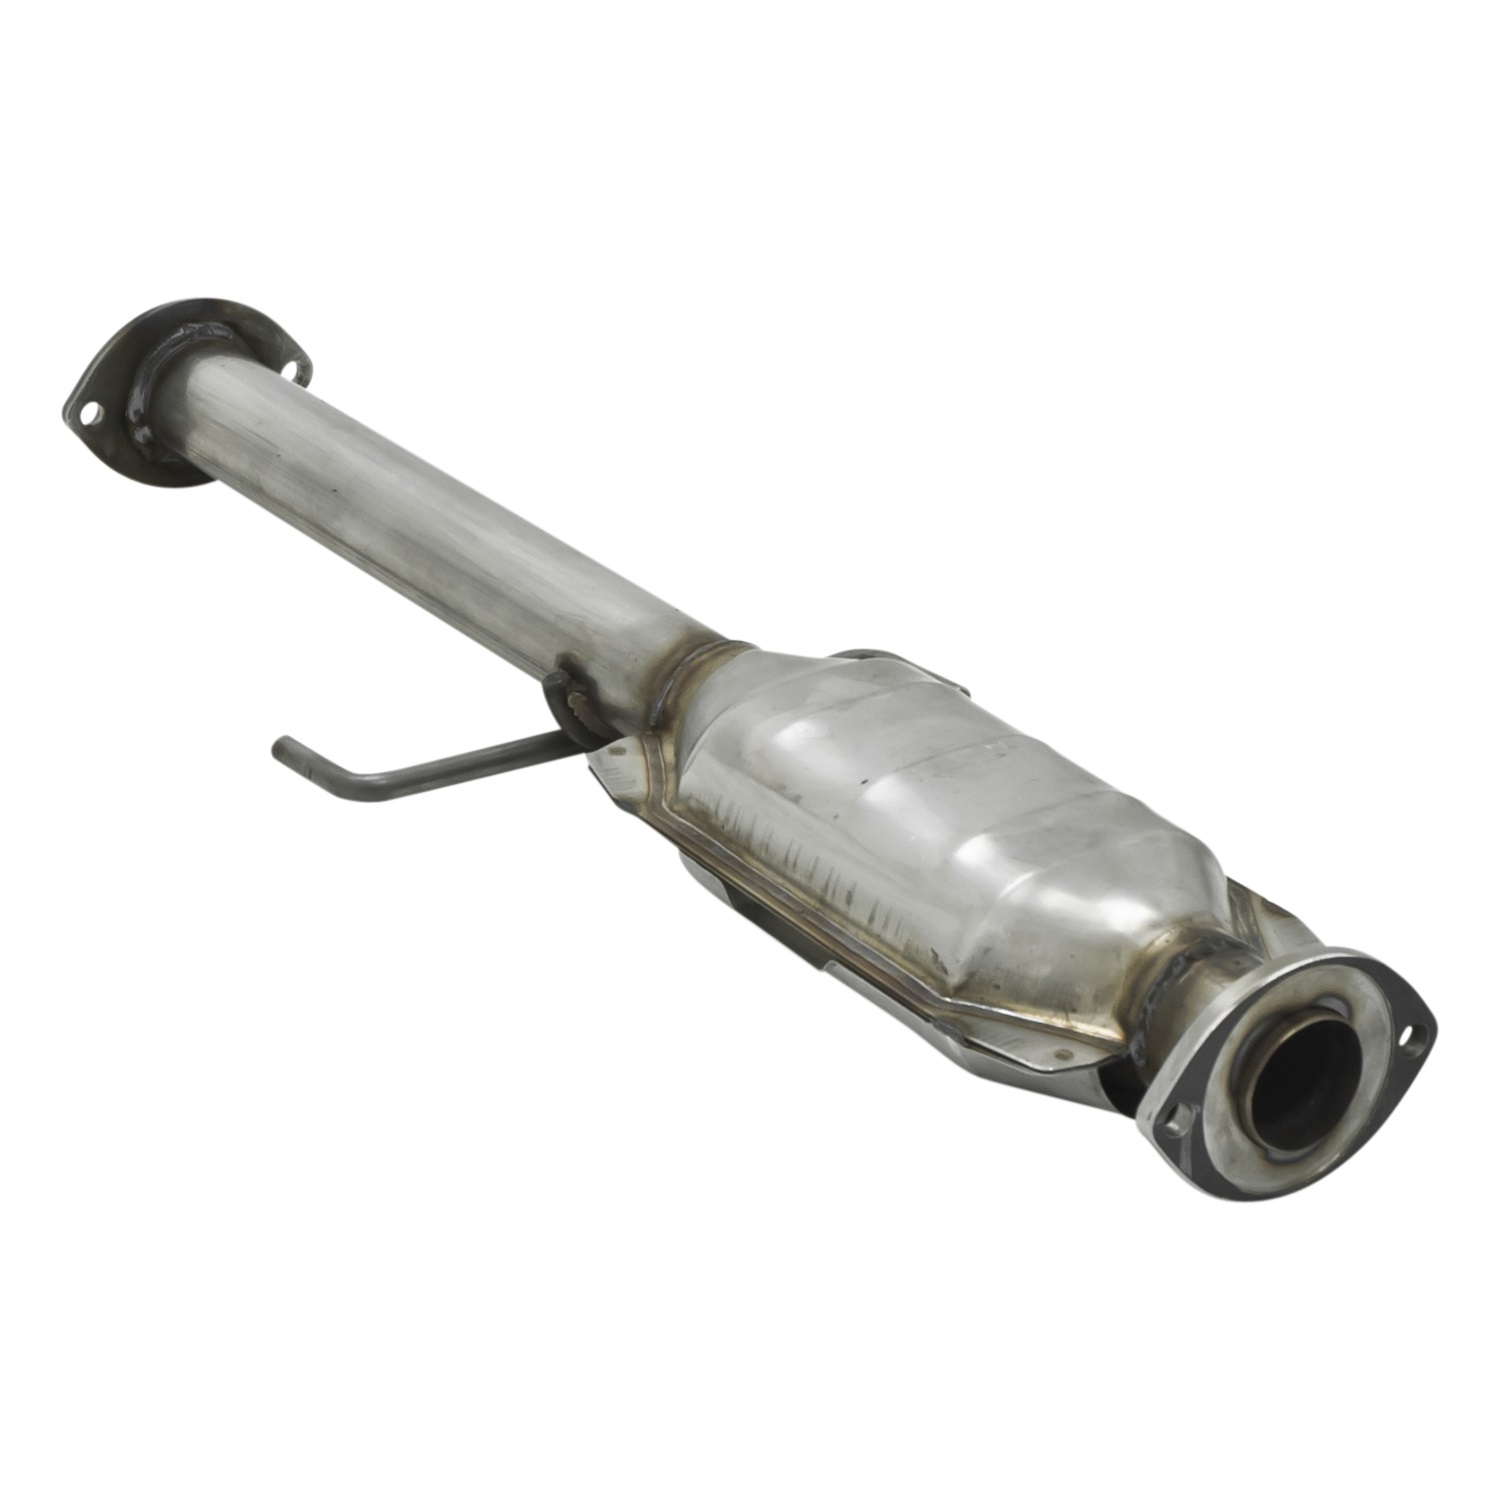 Flowmaster Flowmaster 2050005 Direct Fit Catalytic Converter Fits 00-04 Tacoma